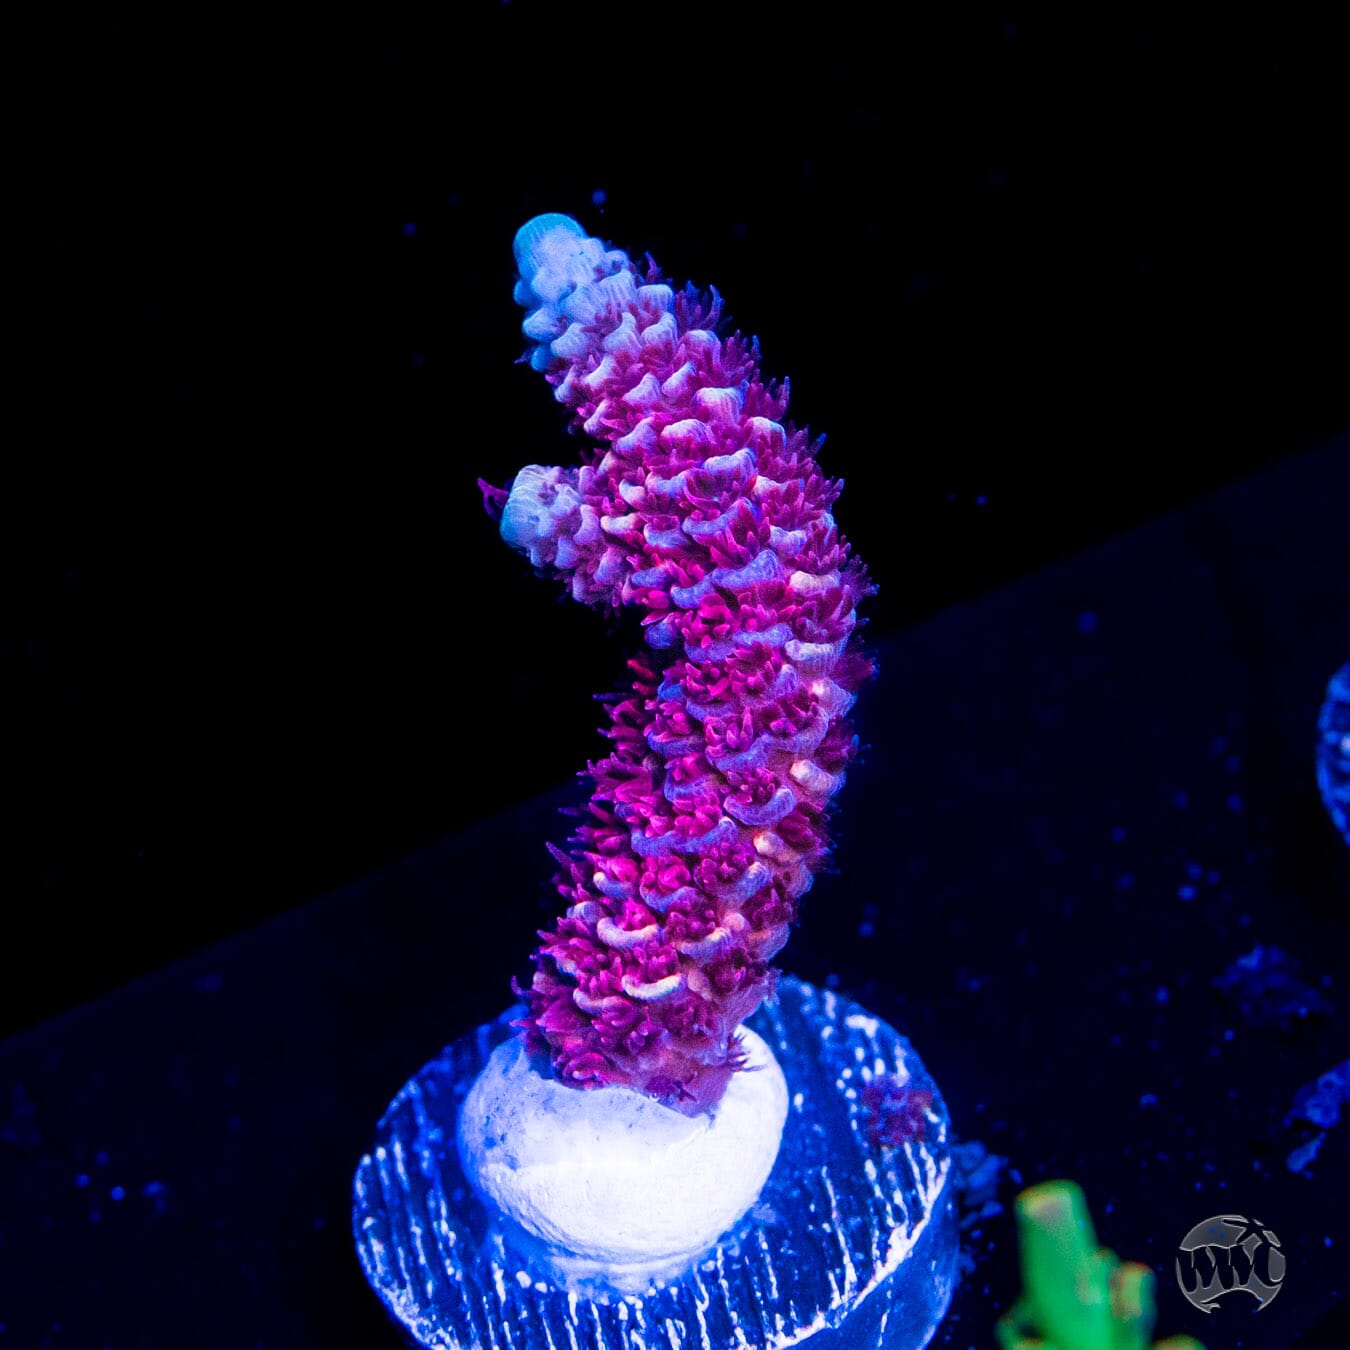 WWC Ice Queen Mille Acropora - Daylight Photo